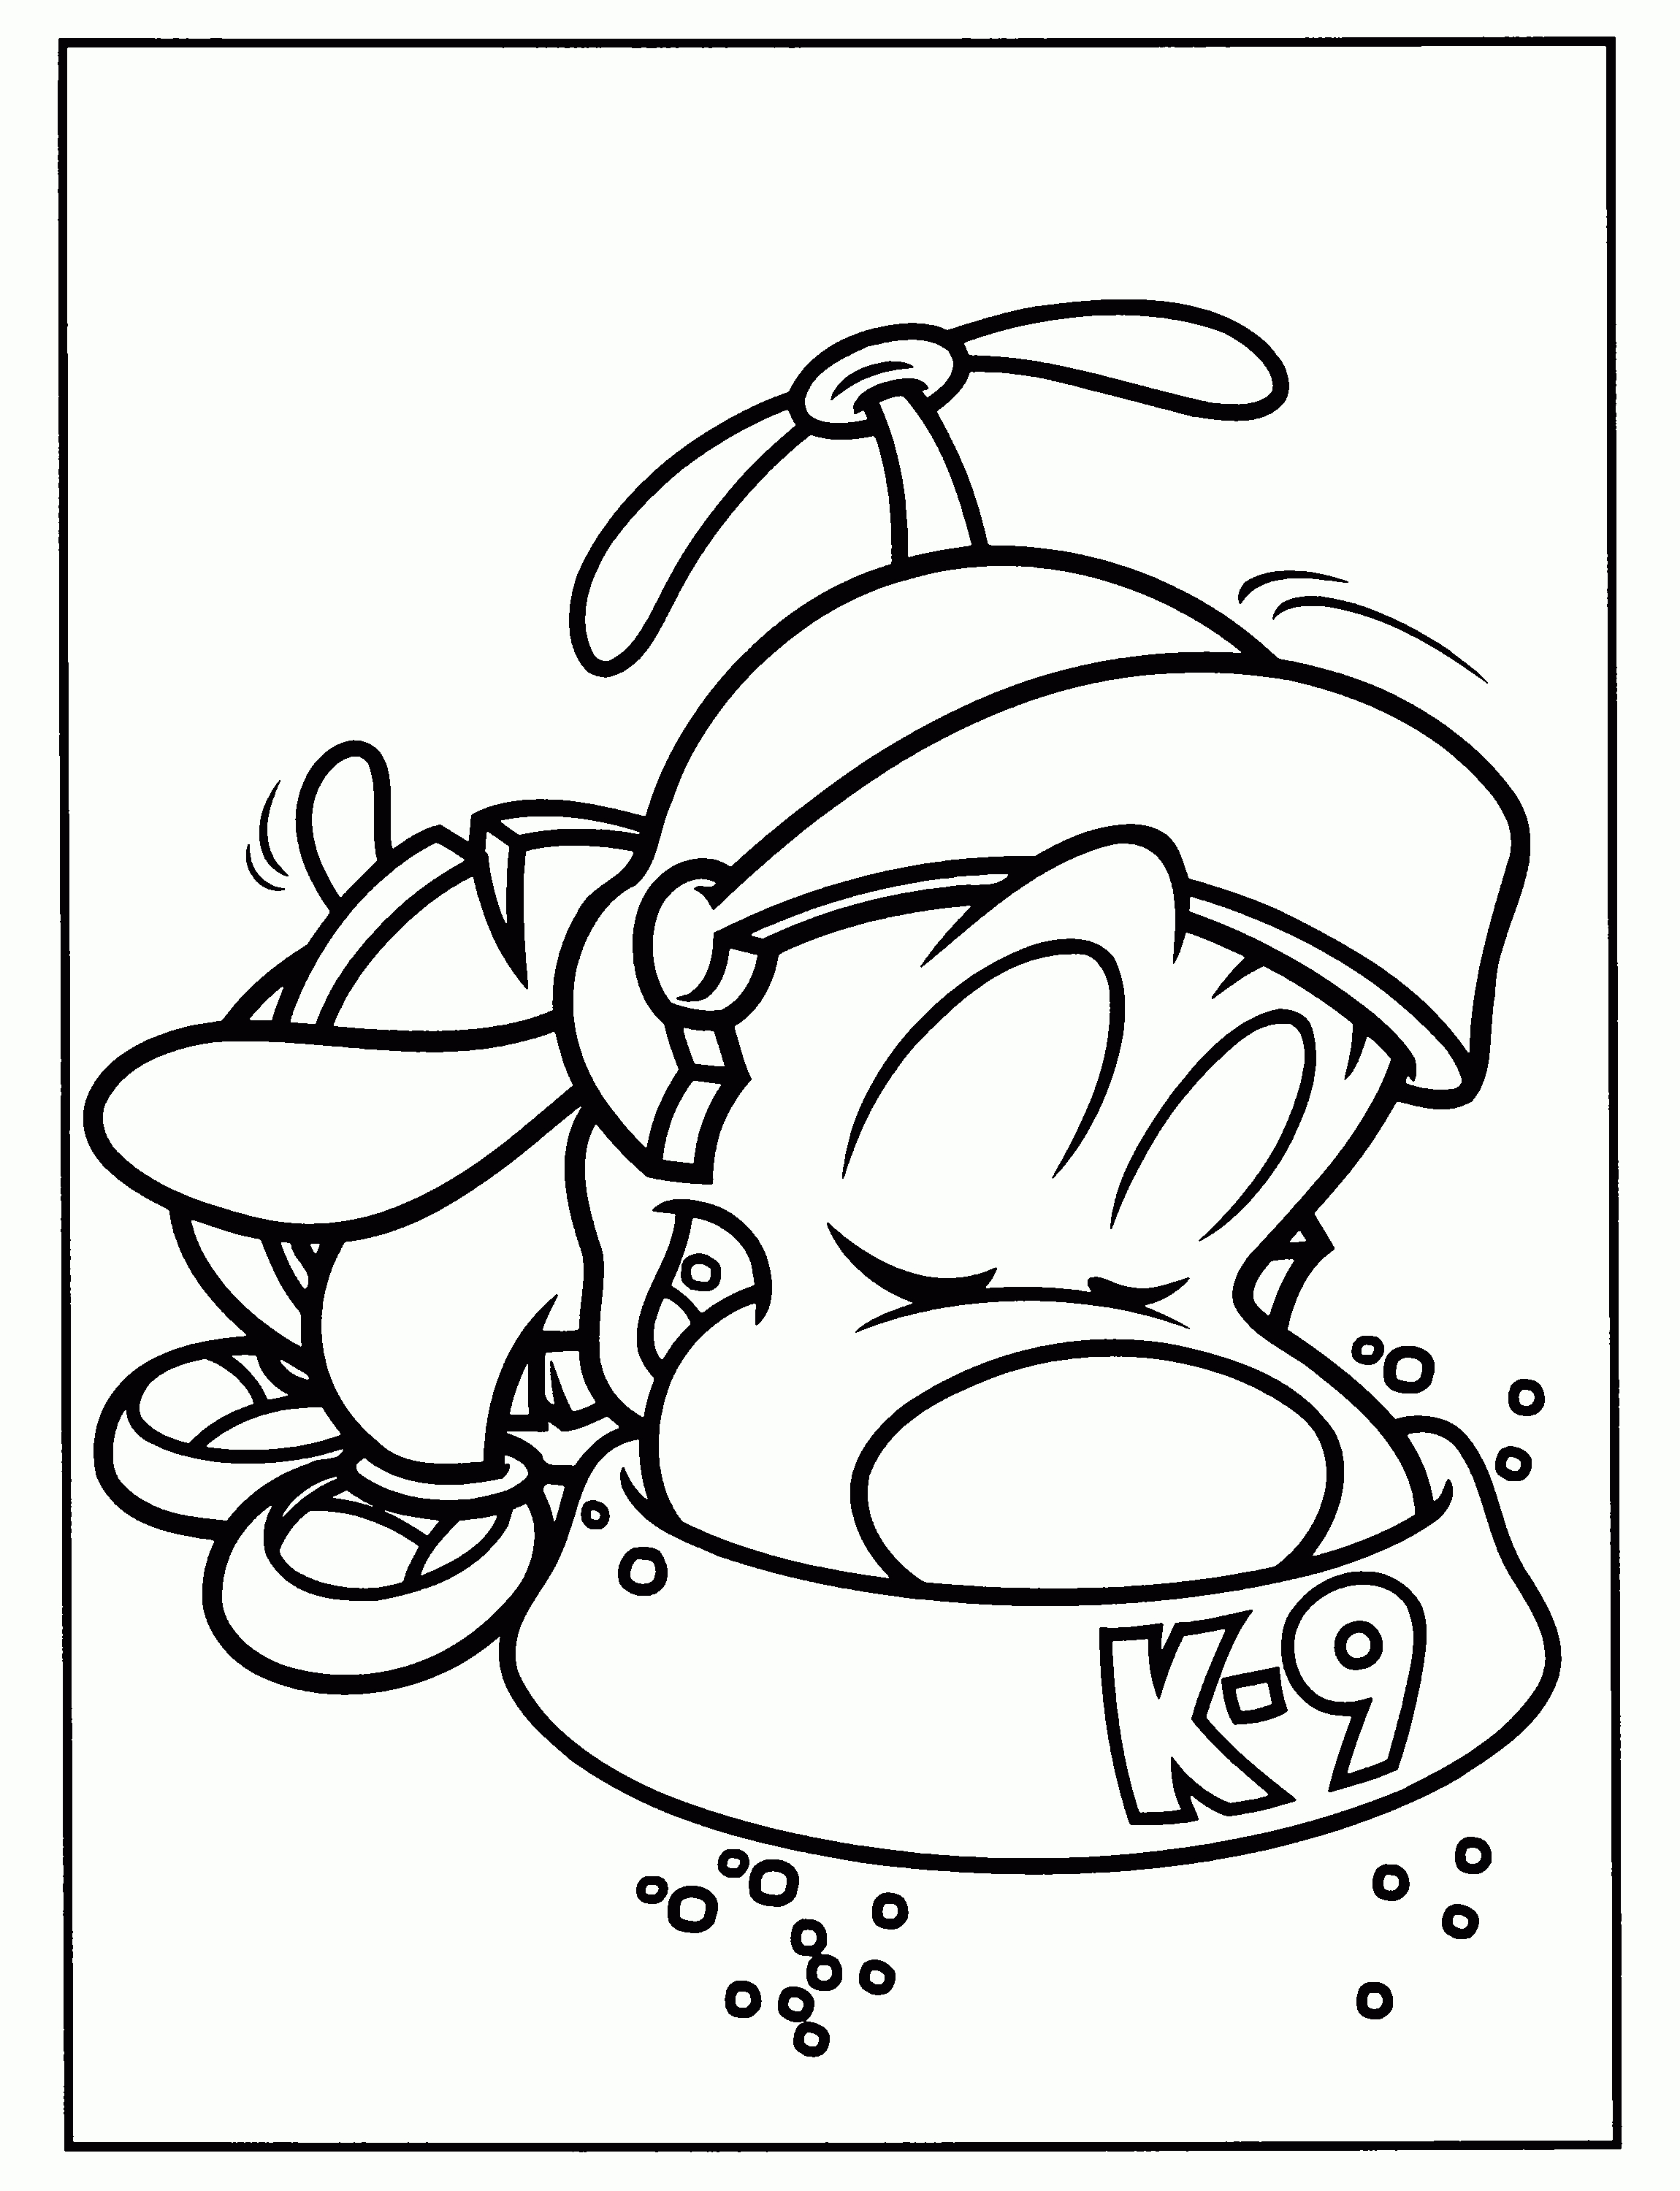 Tokidoki Coloring Pages Tokidoki Coloring Pages Coloring Home